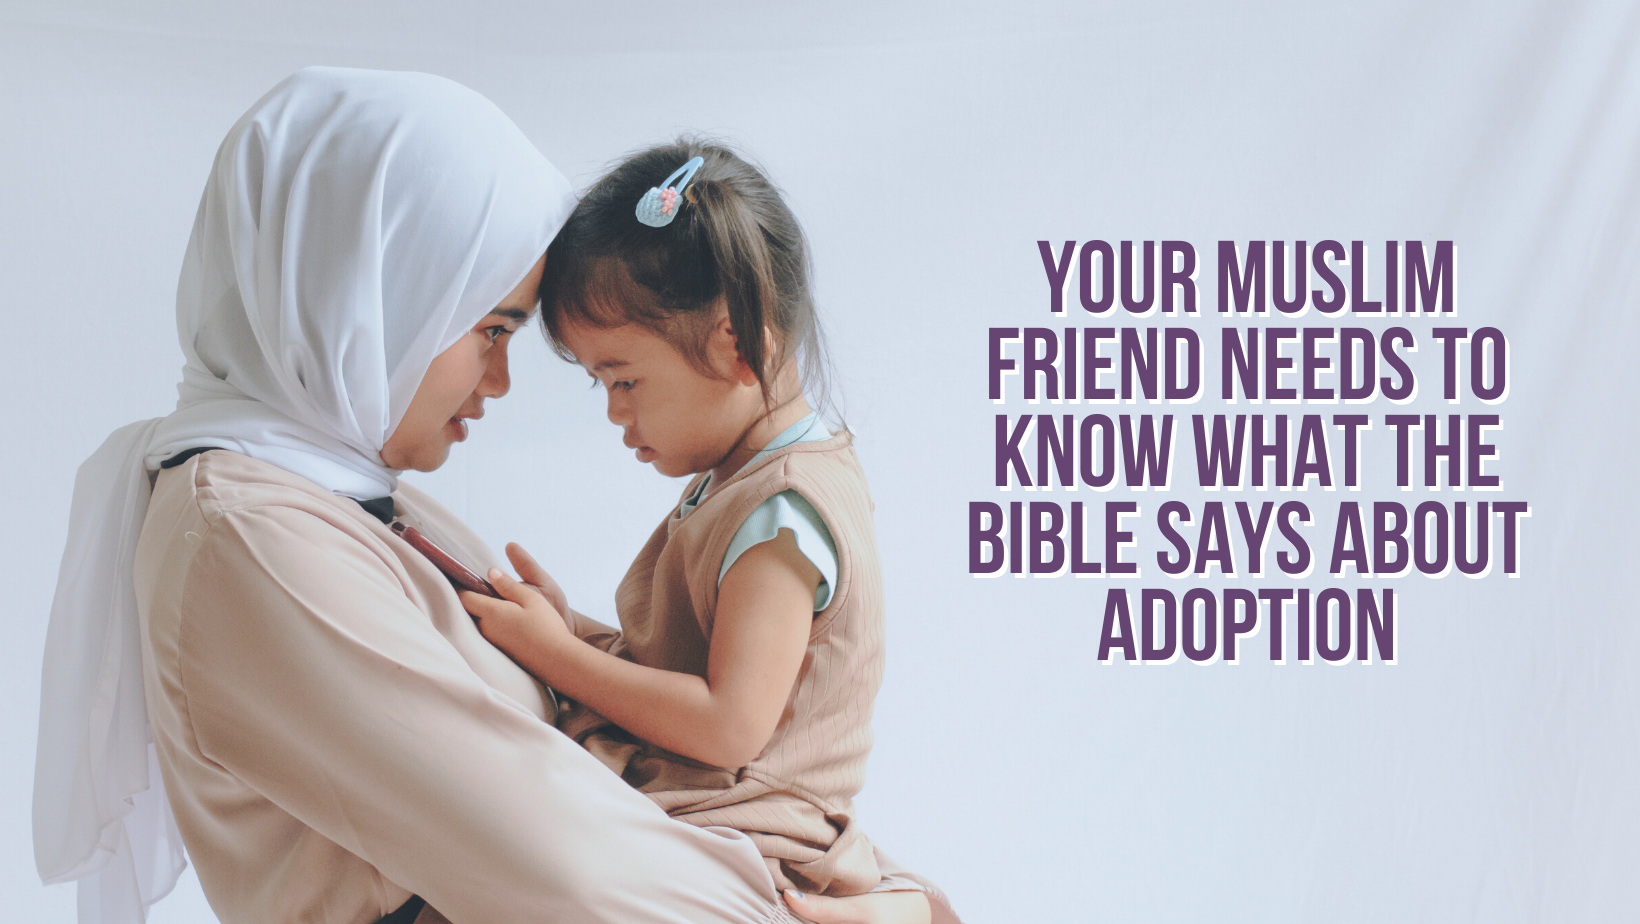 Your Muslim friend needs to know what the Bible says about adoption